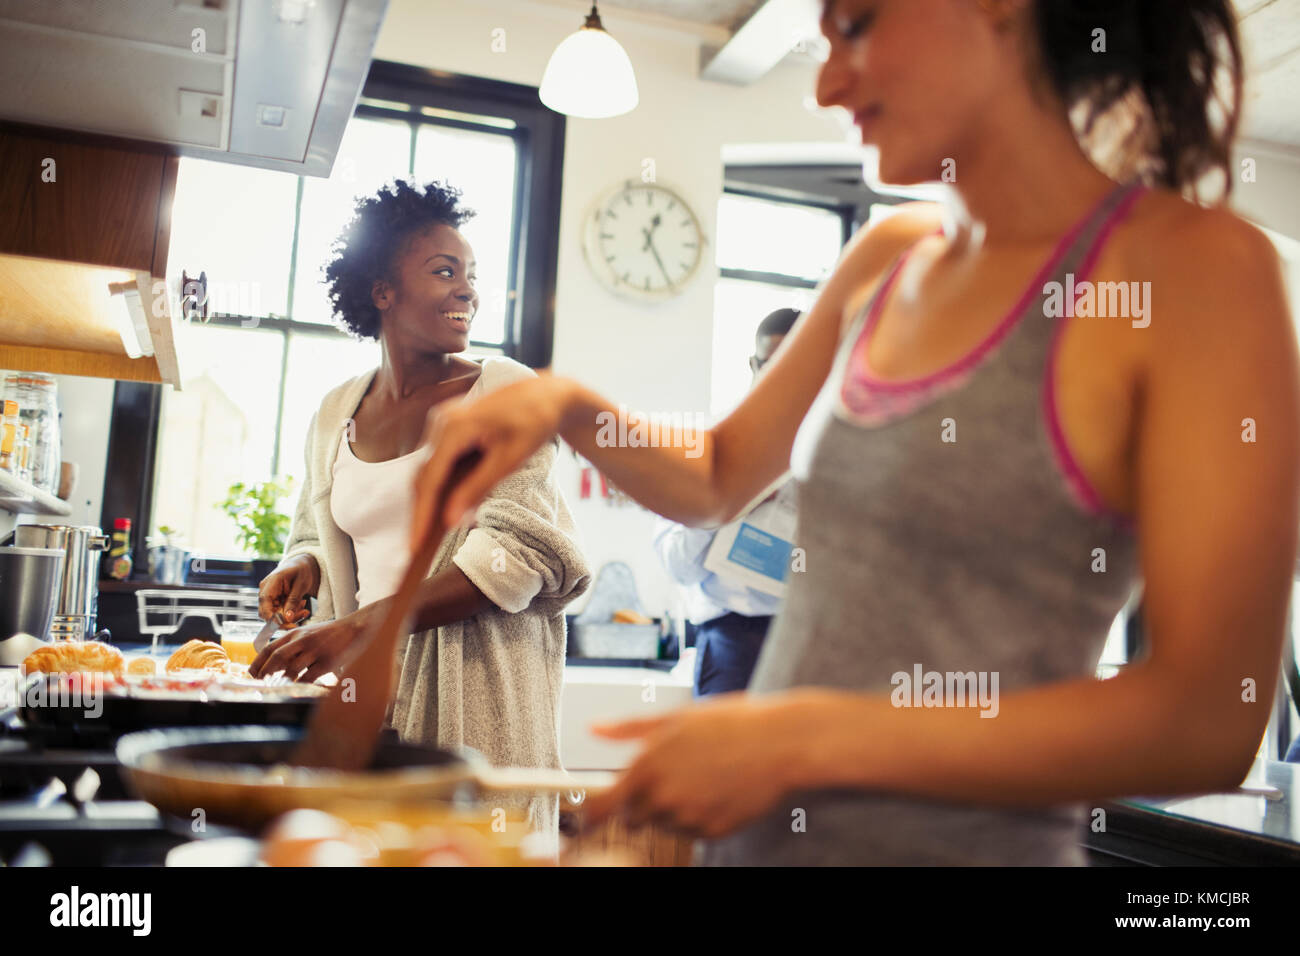 Women cooking in kitchen Stock Photo